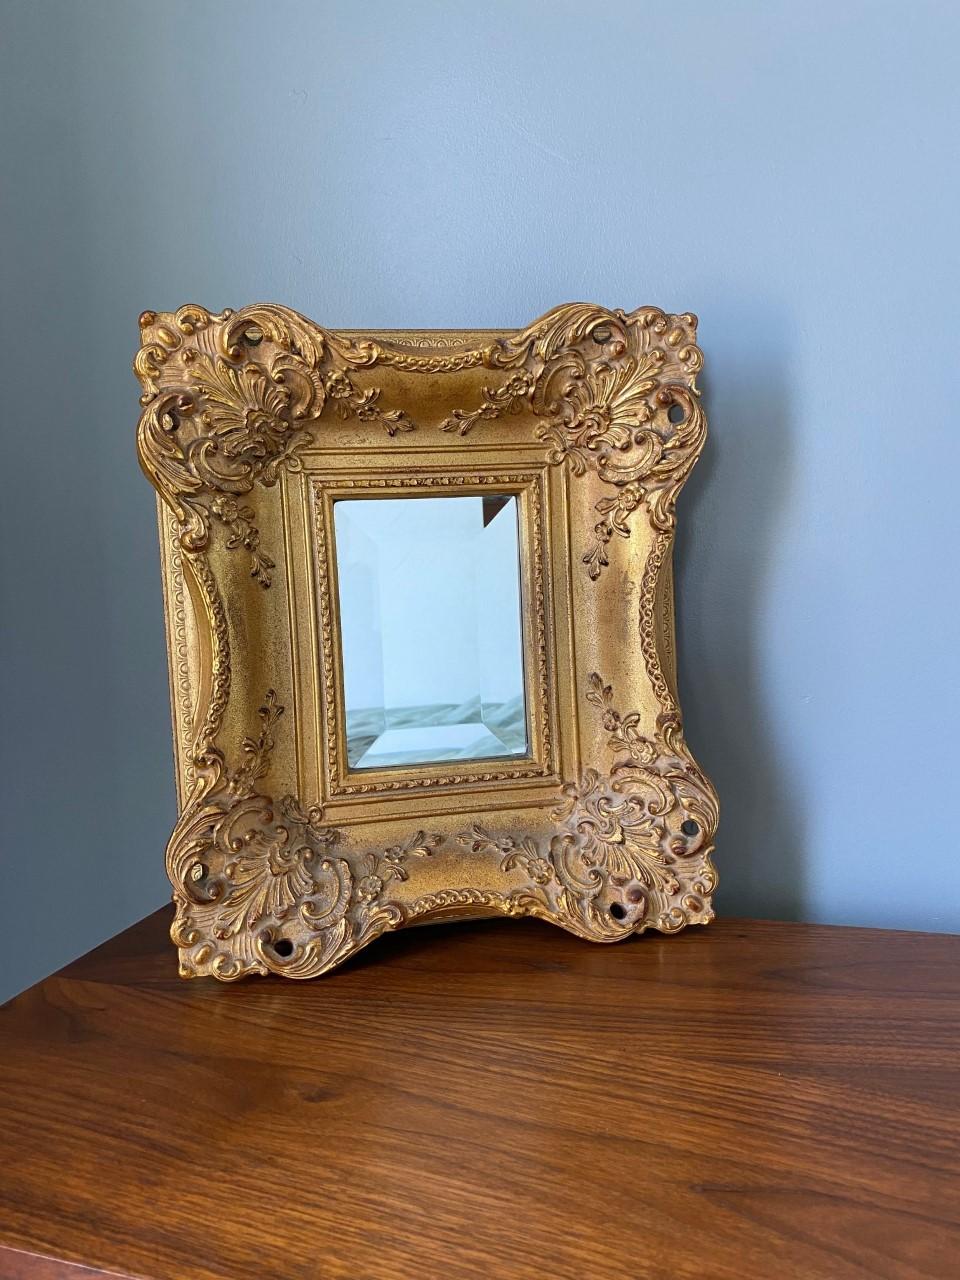 Beautifully ornate and gold accent mirror. This piece brings light and shine to any corner or space. The intricate and captivating wood frame envelops a beveled mirror with beautiful contrast. Classic and unexpected at the same time. An incredible